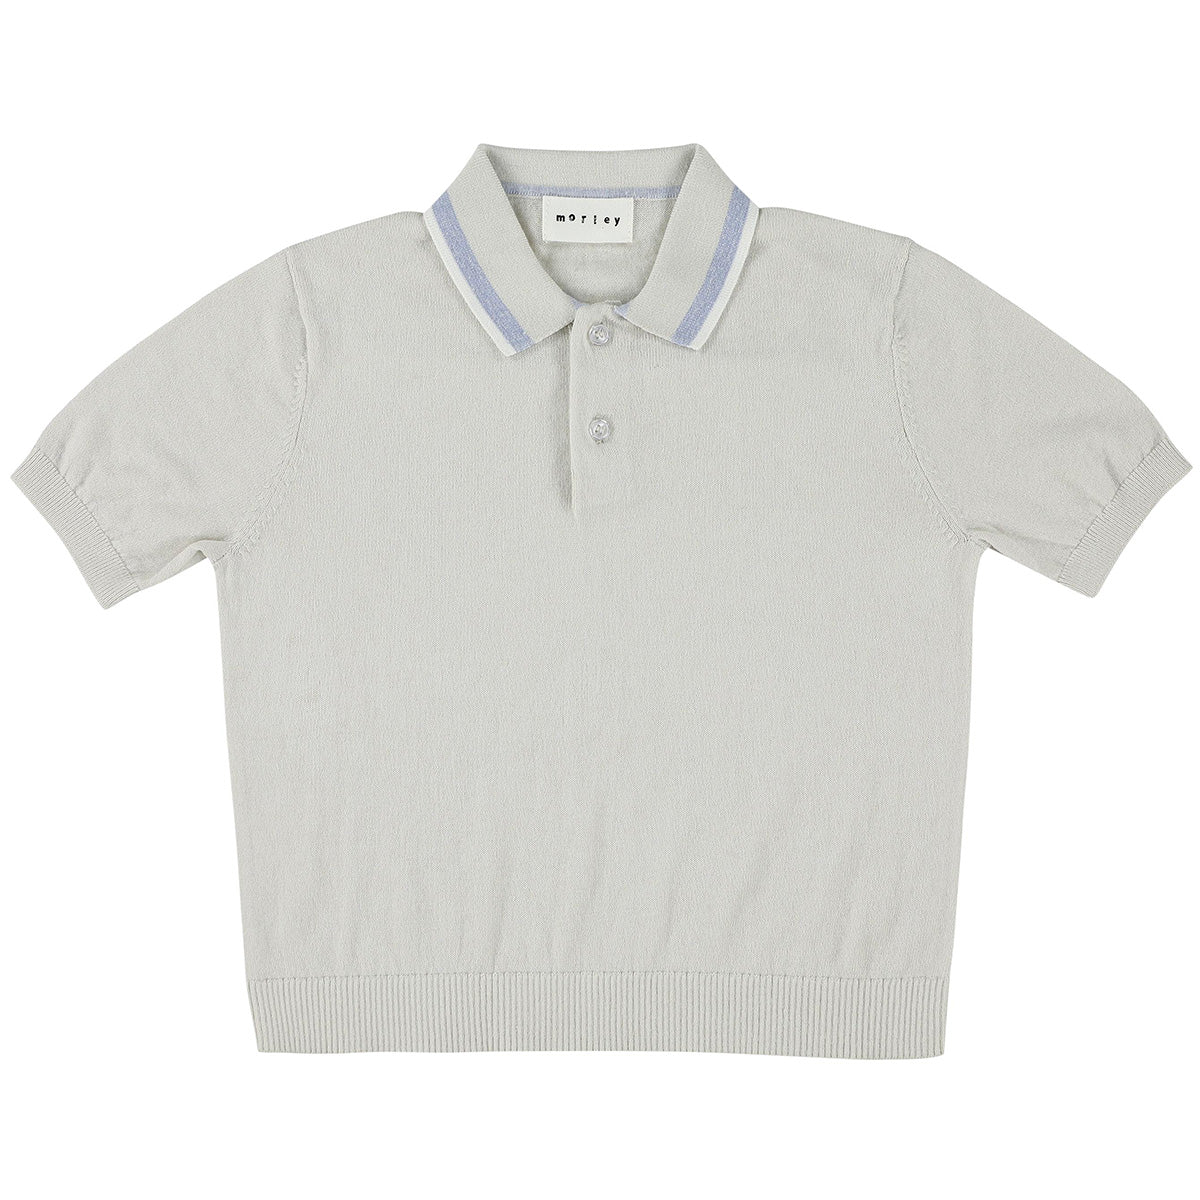 The Utile Shirt from Morley. Polo t-shirt, Collar with grey stripe, Button closure at the front, Ribbed knit trim, Short sleeves.